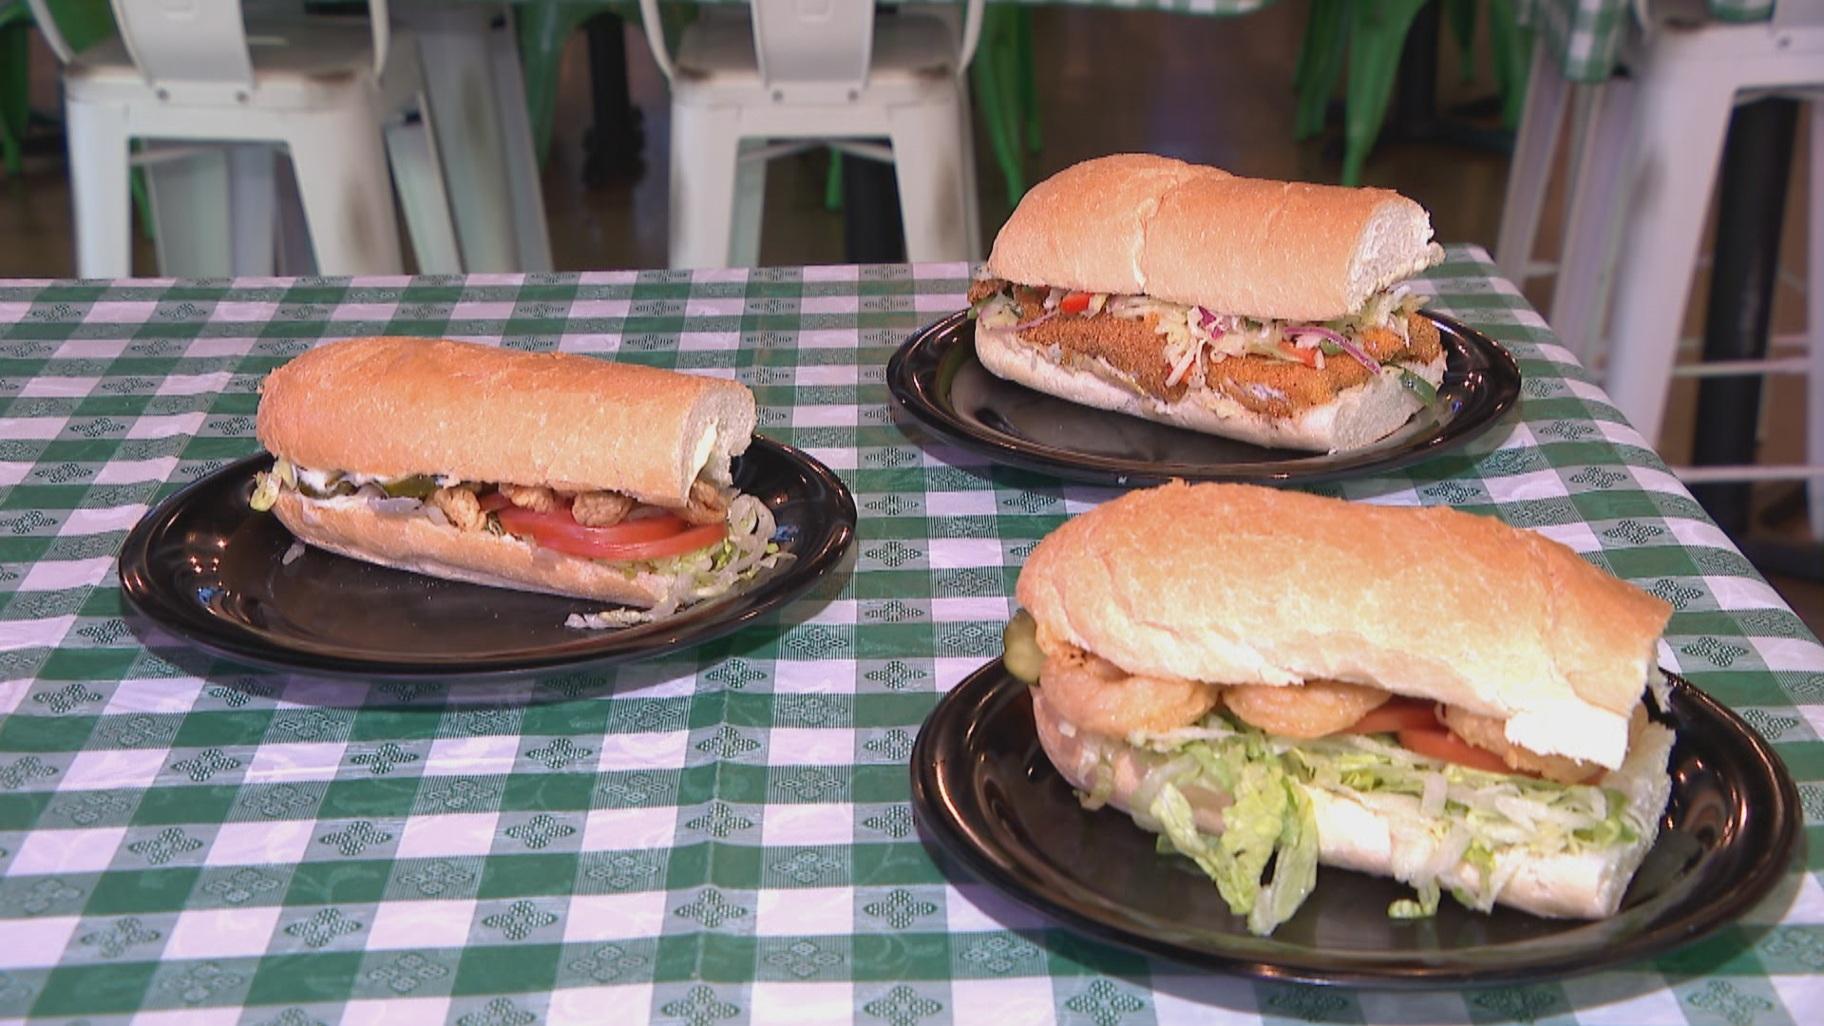 Po’boy sandwiches at Daisy’s Po-Boy and Tavern in Hyde Park. (WTTW News)